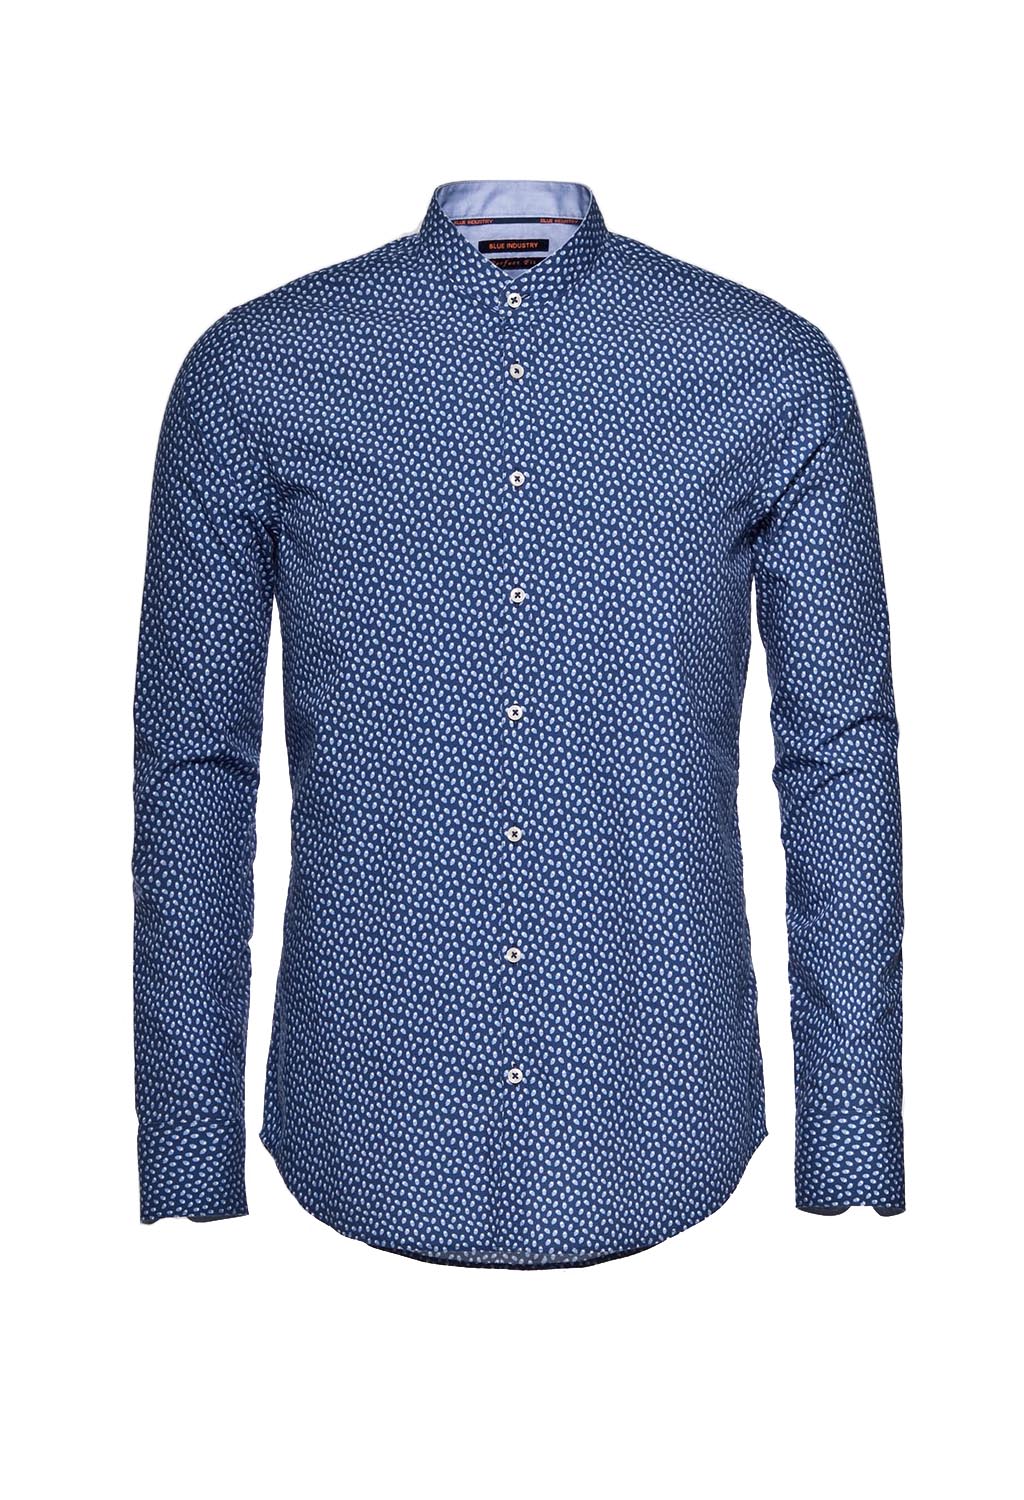 blue-industry-micro-strawberry-shirt-850.71